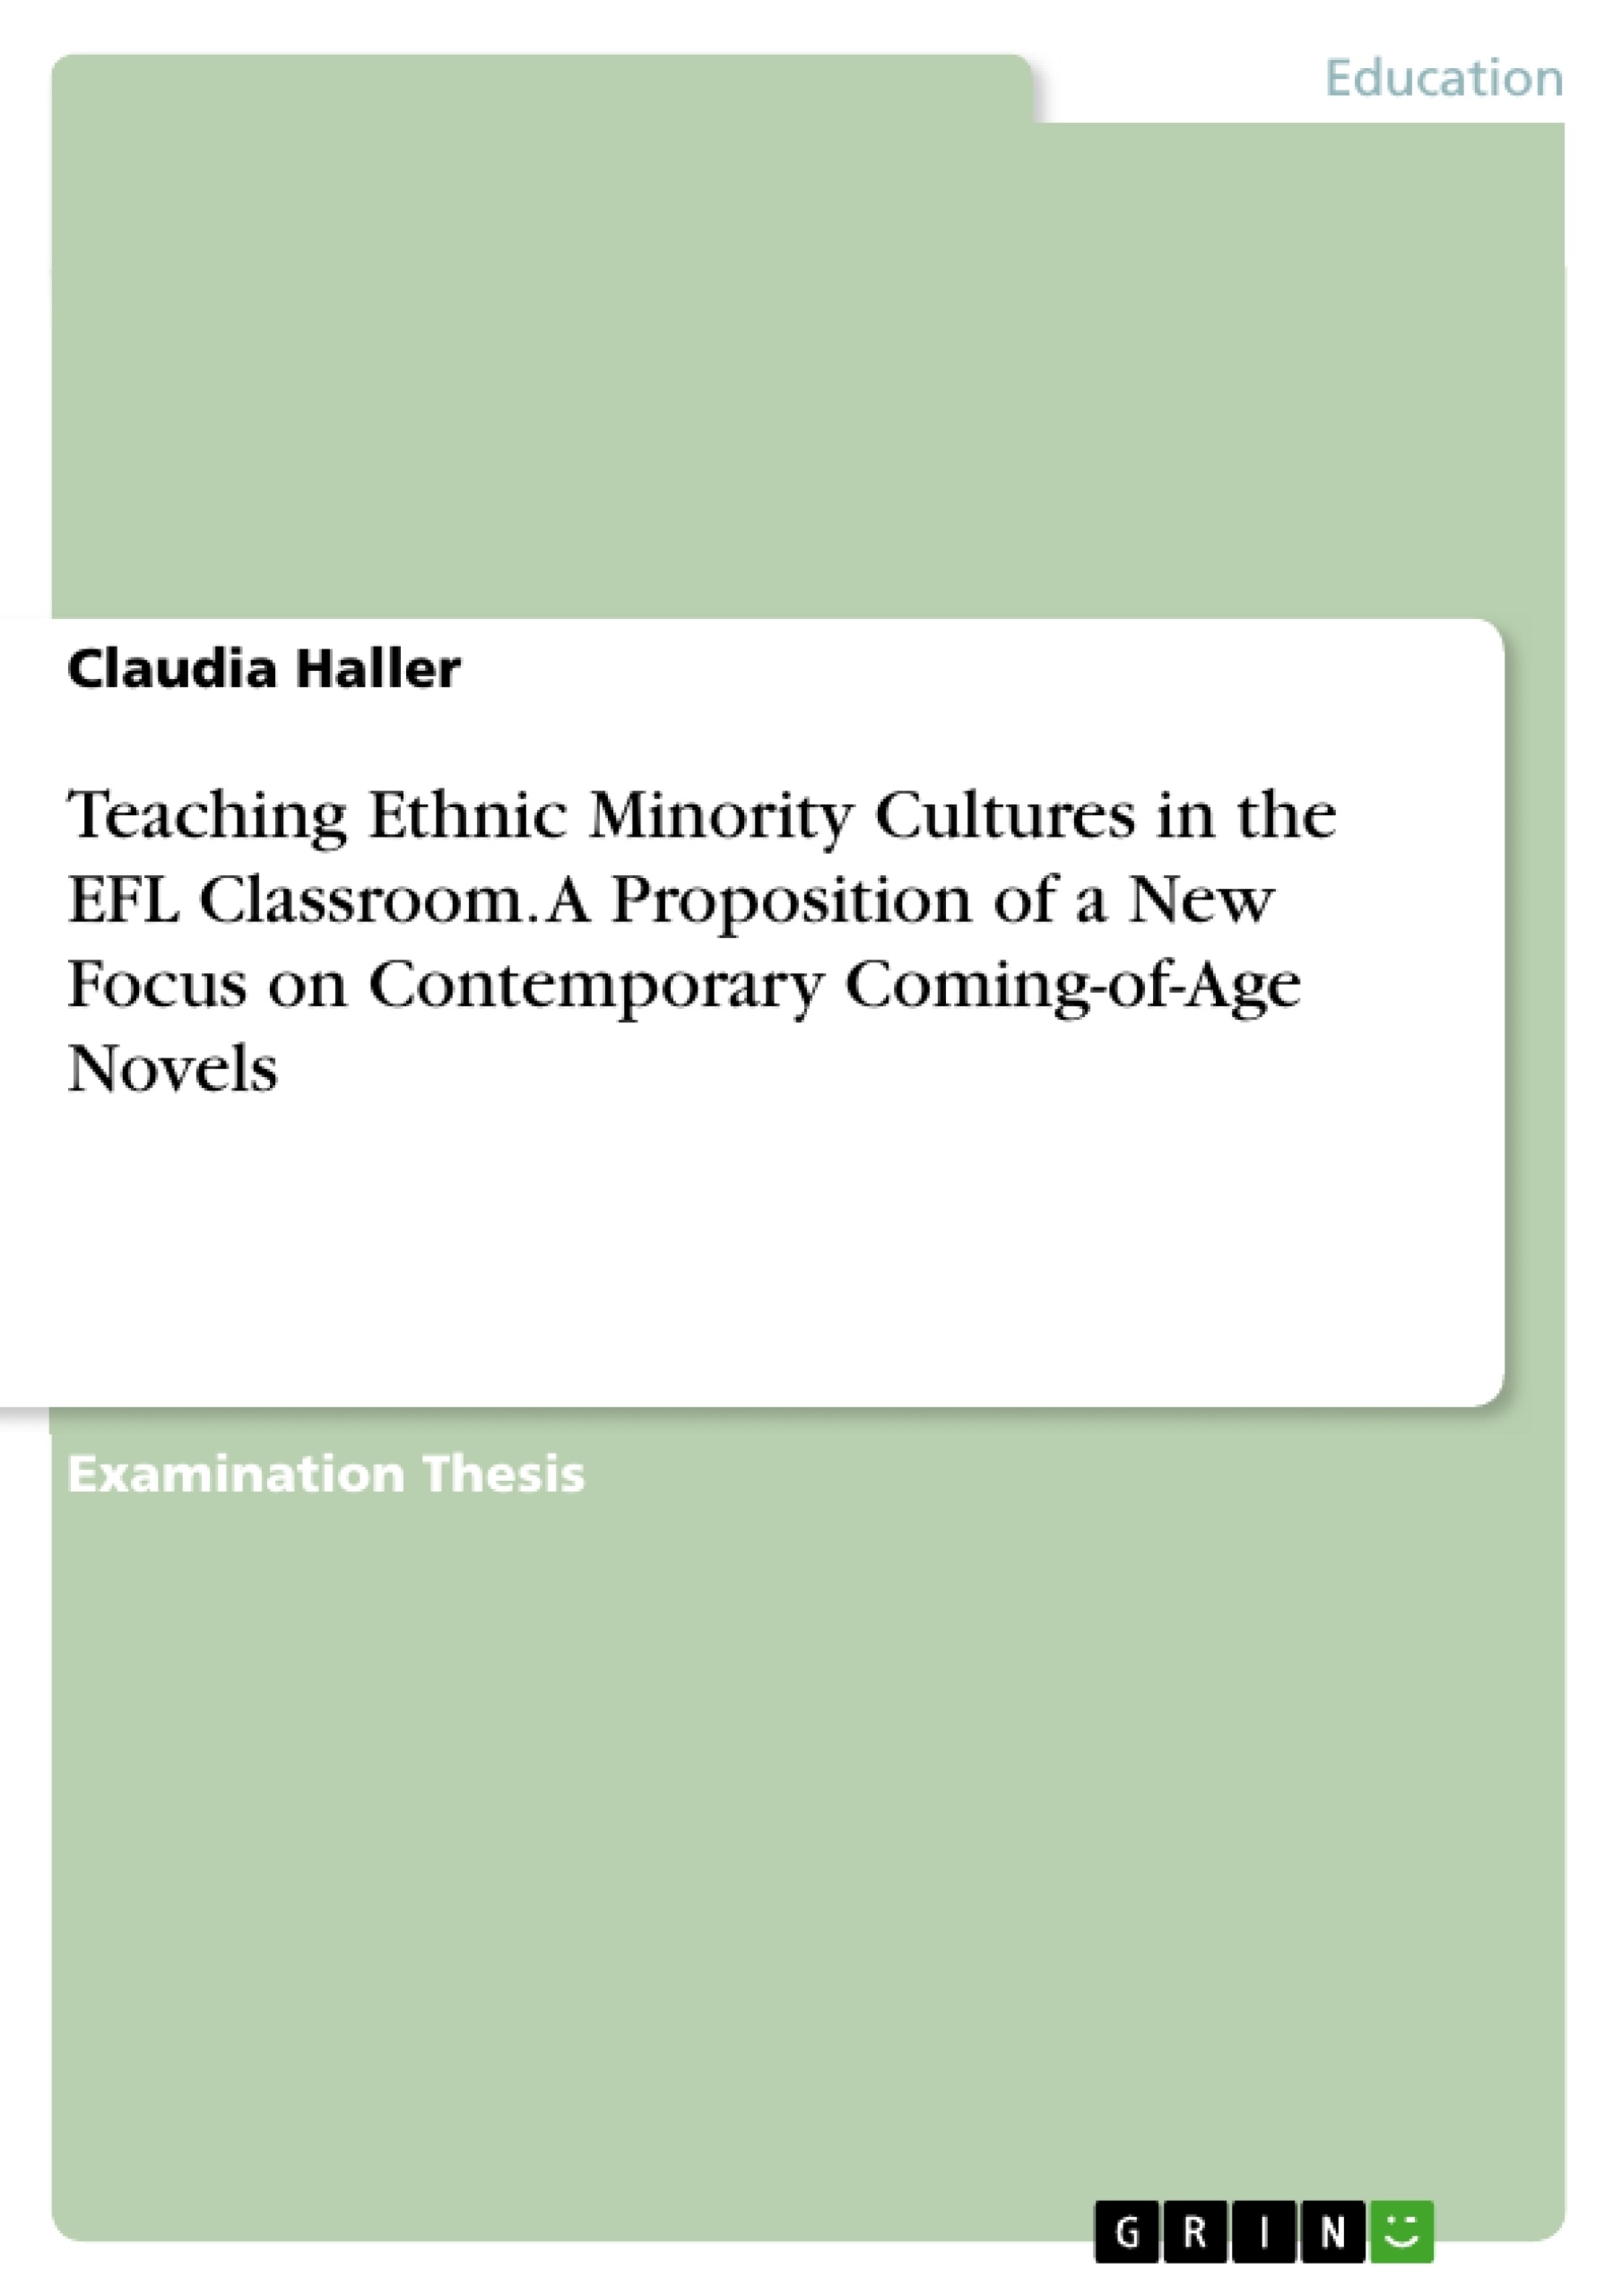 Title: Teaching Ethnic Minority Cultures in the EFL Classroom. A Proposition of a New Focus on Contemporary Coming-of-Age Novels